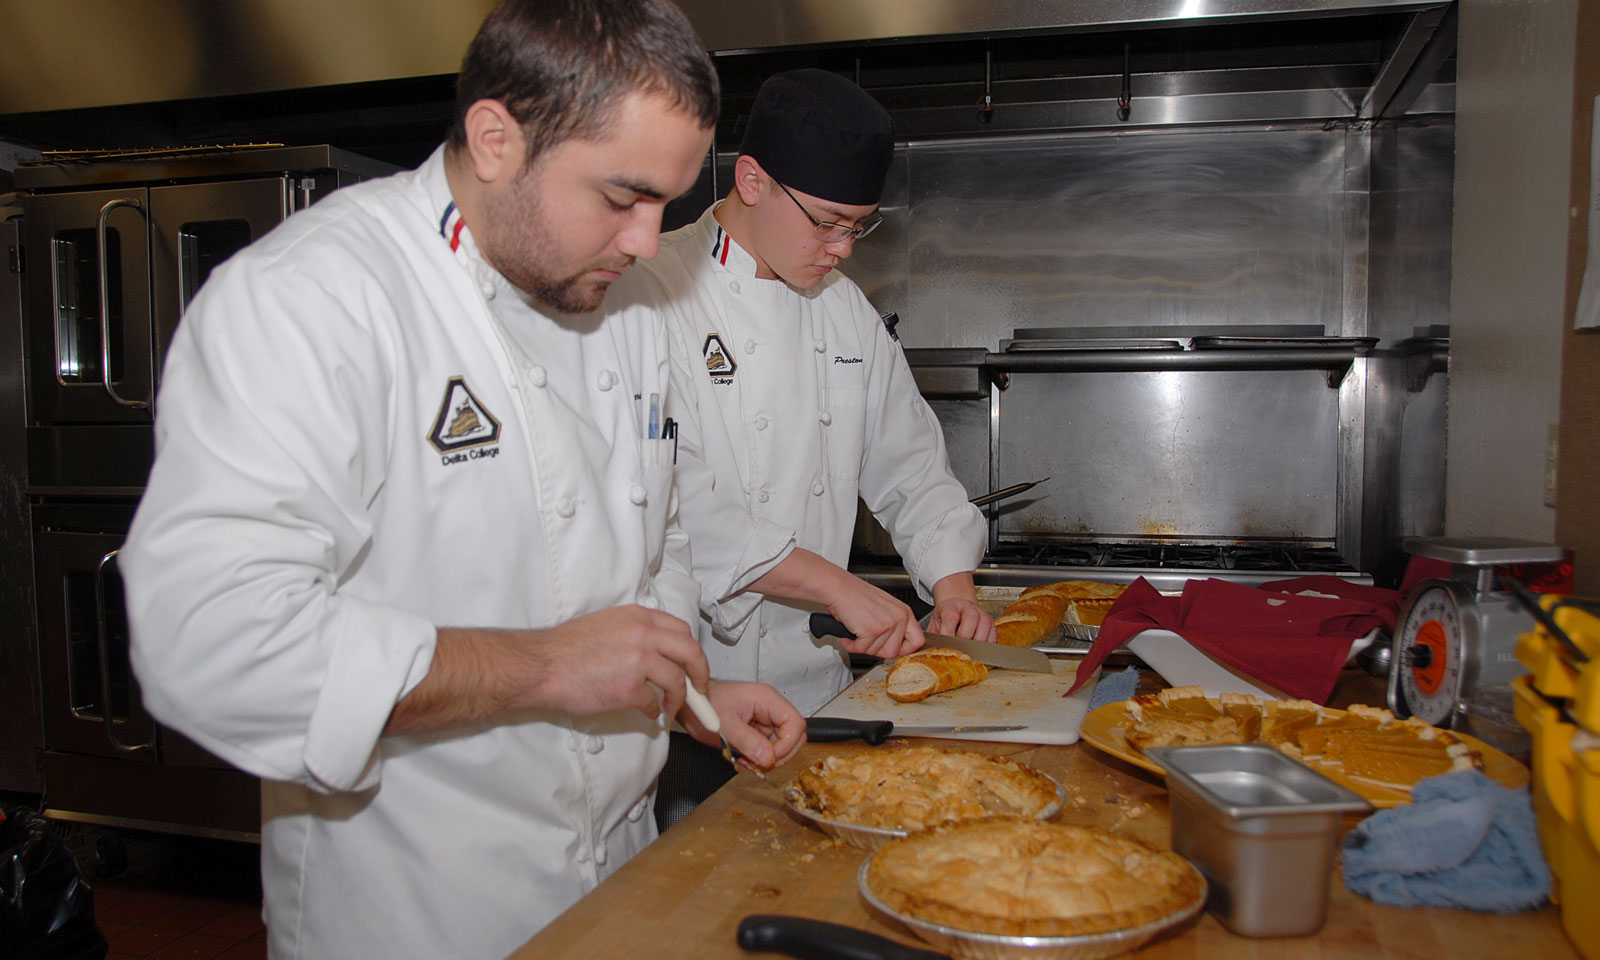 Students cut a pie during Culinary Arts Lab class.